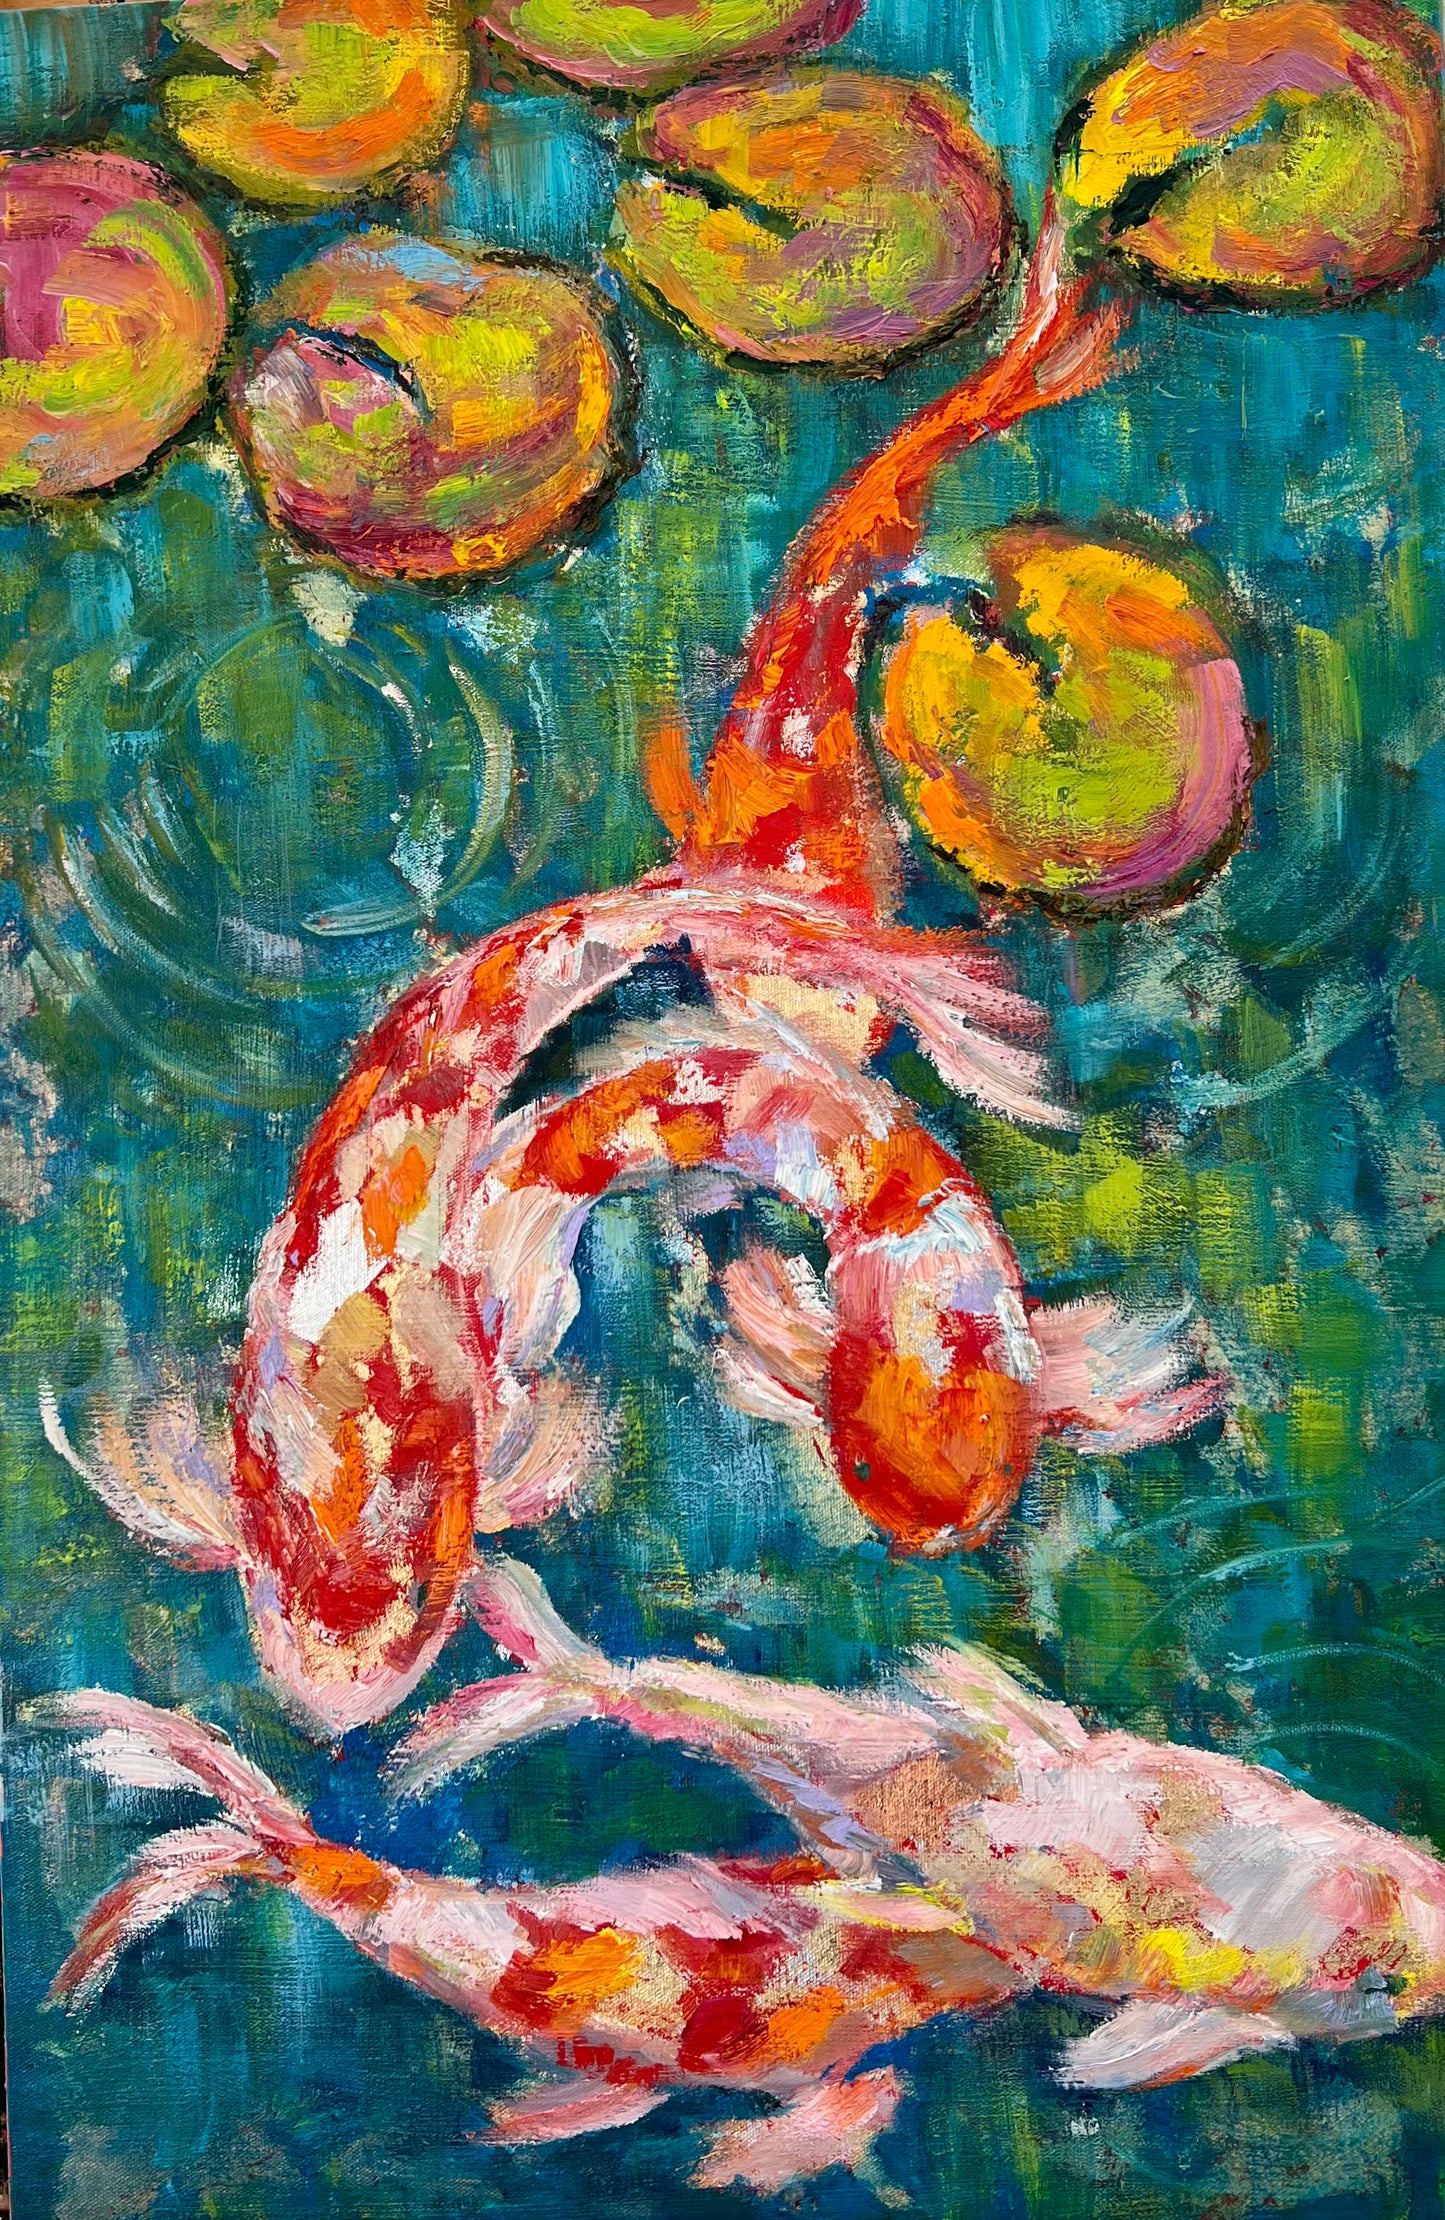 In a Peaceful Place, Ripples Fan out on A Lily Pond, Colourful Koi Play (Print)